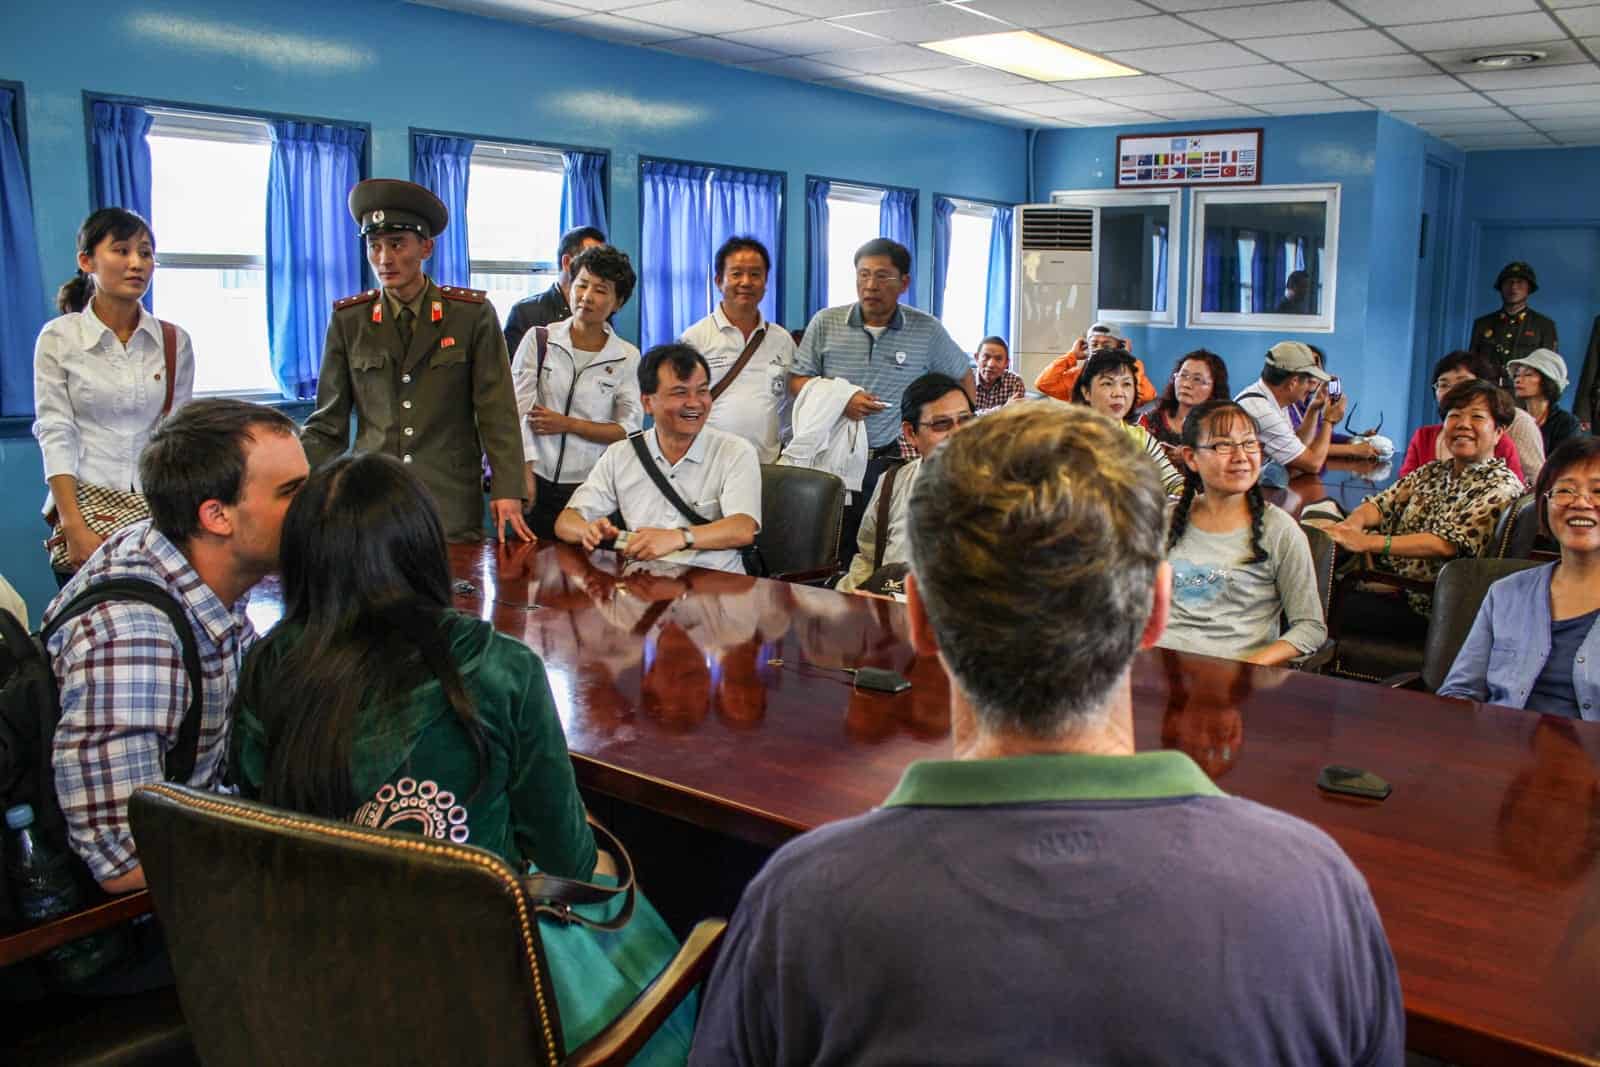 Tourists sit around the table at the DMZ meeting room on the North Korea side